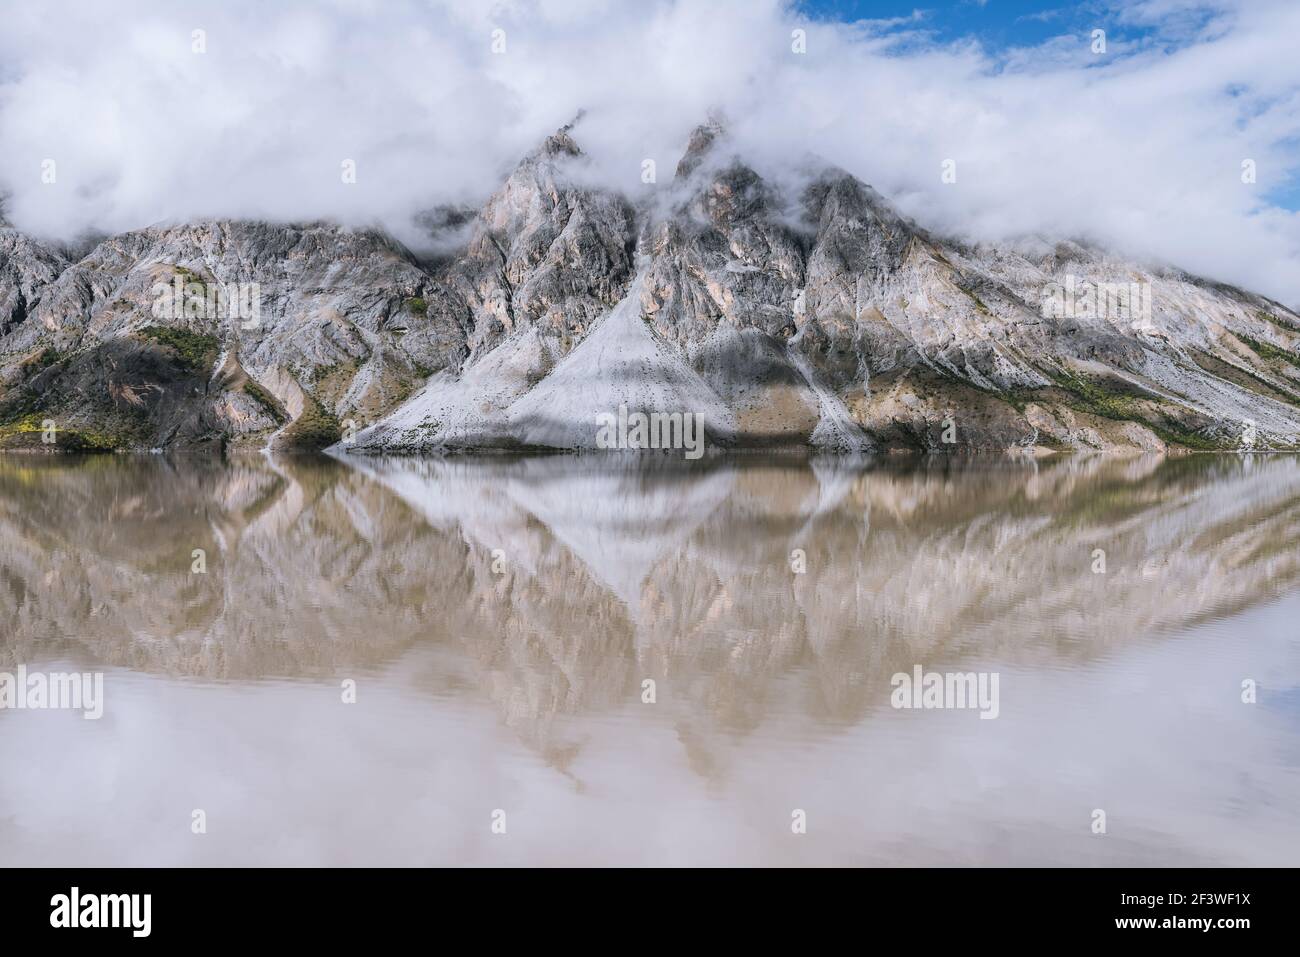 The calm surface of the lake and the reflection of the mountains by the lake Stock Photo